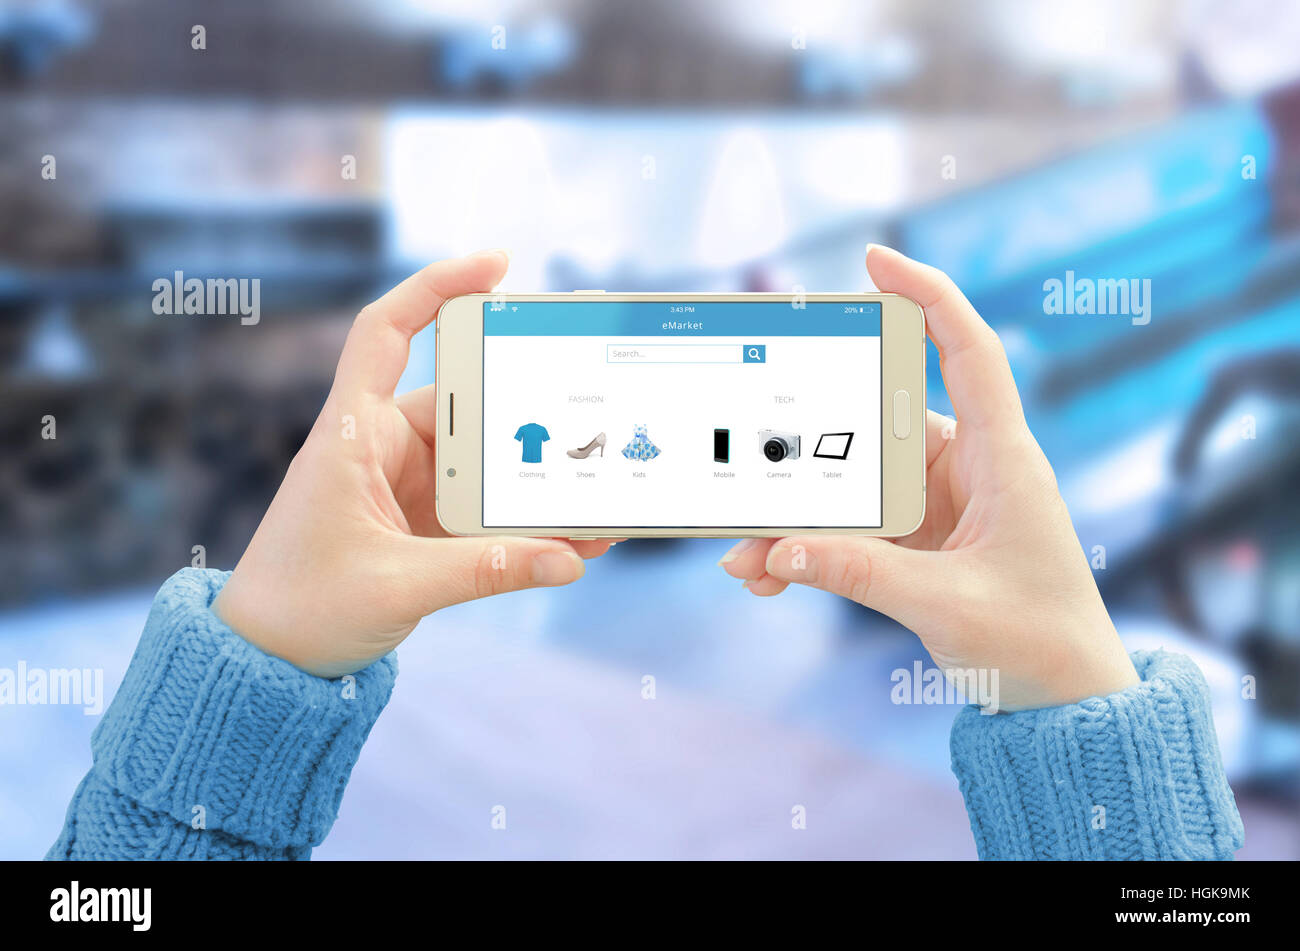 Phone in horizontal position in woman hands. Commerce app with modern user friendly interface on mobile display. Business center in background. Stock Photo